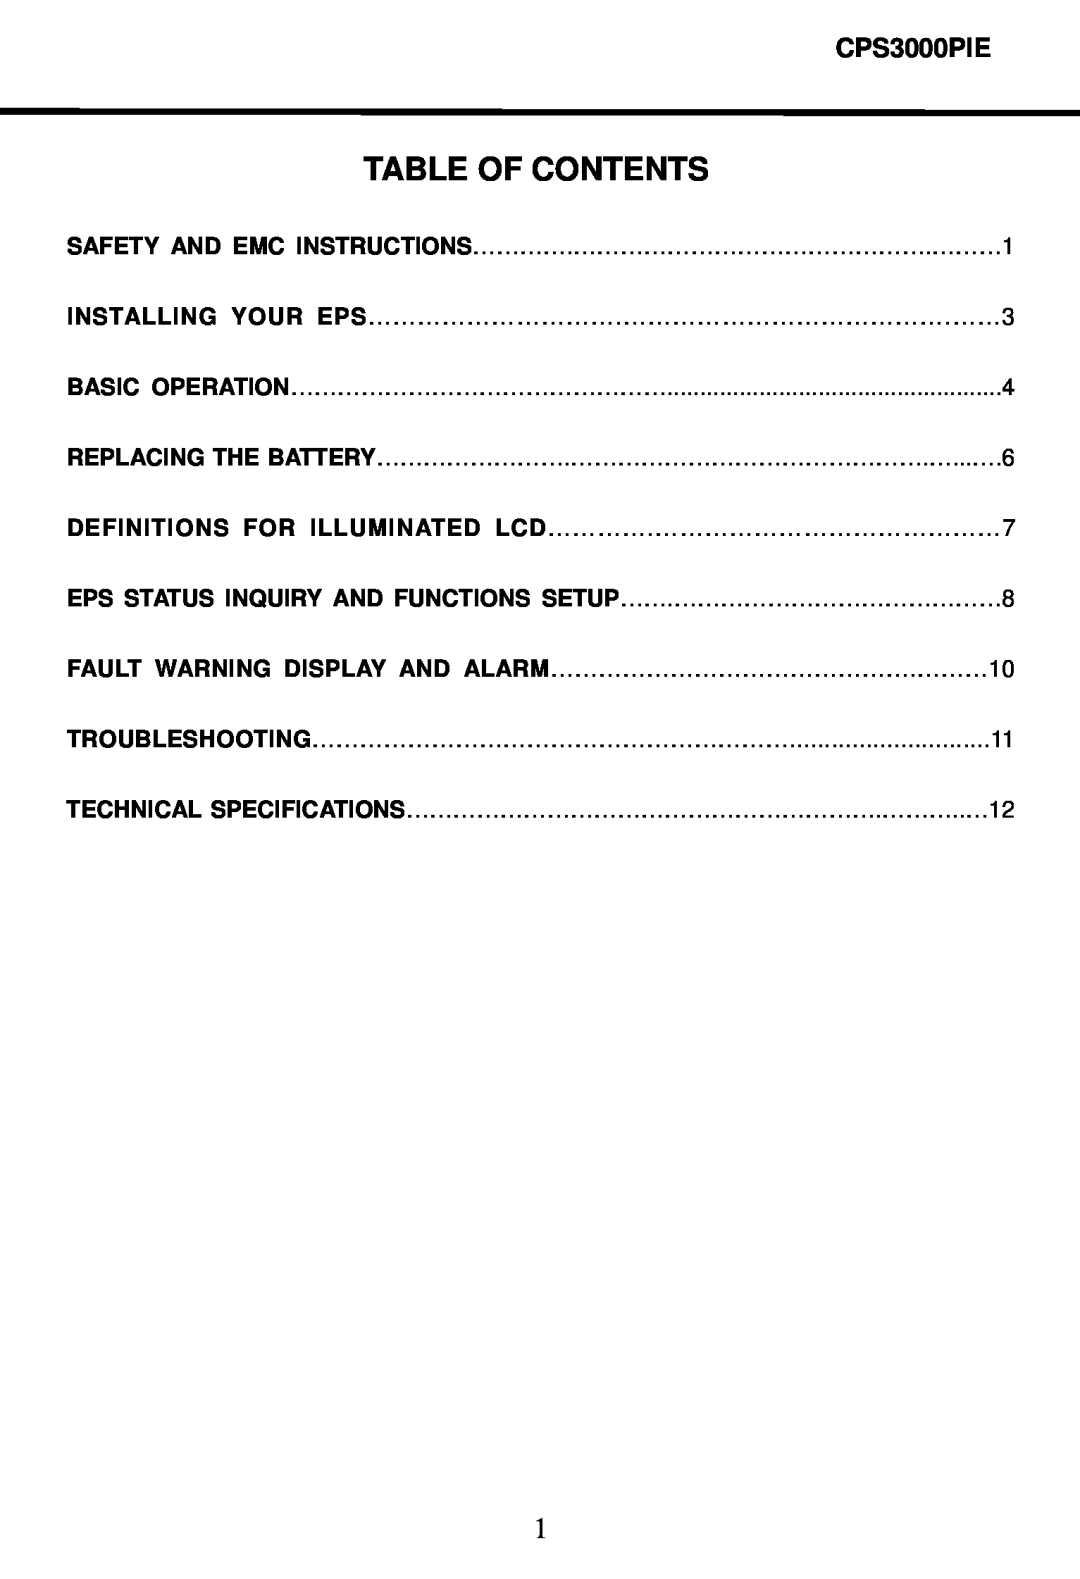 CyberPower Systems CPS3000PIE user manual Table Of Contents, SAFETY AND EMC INSTRUCTIONS………….……………………………………….………1 